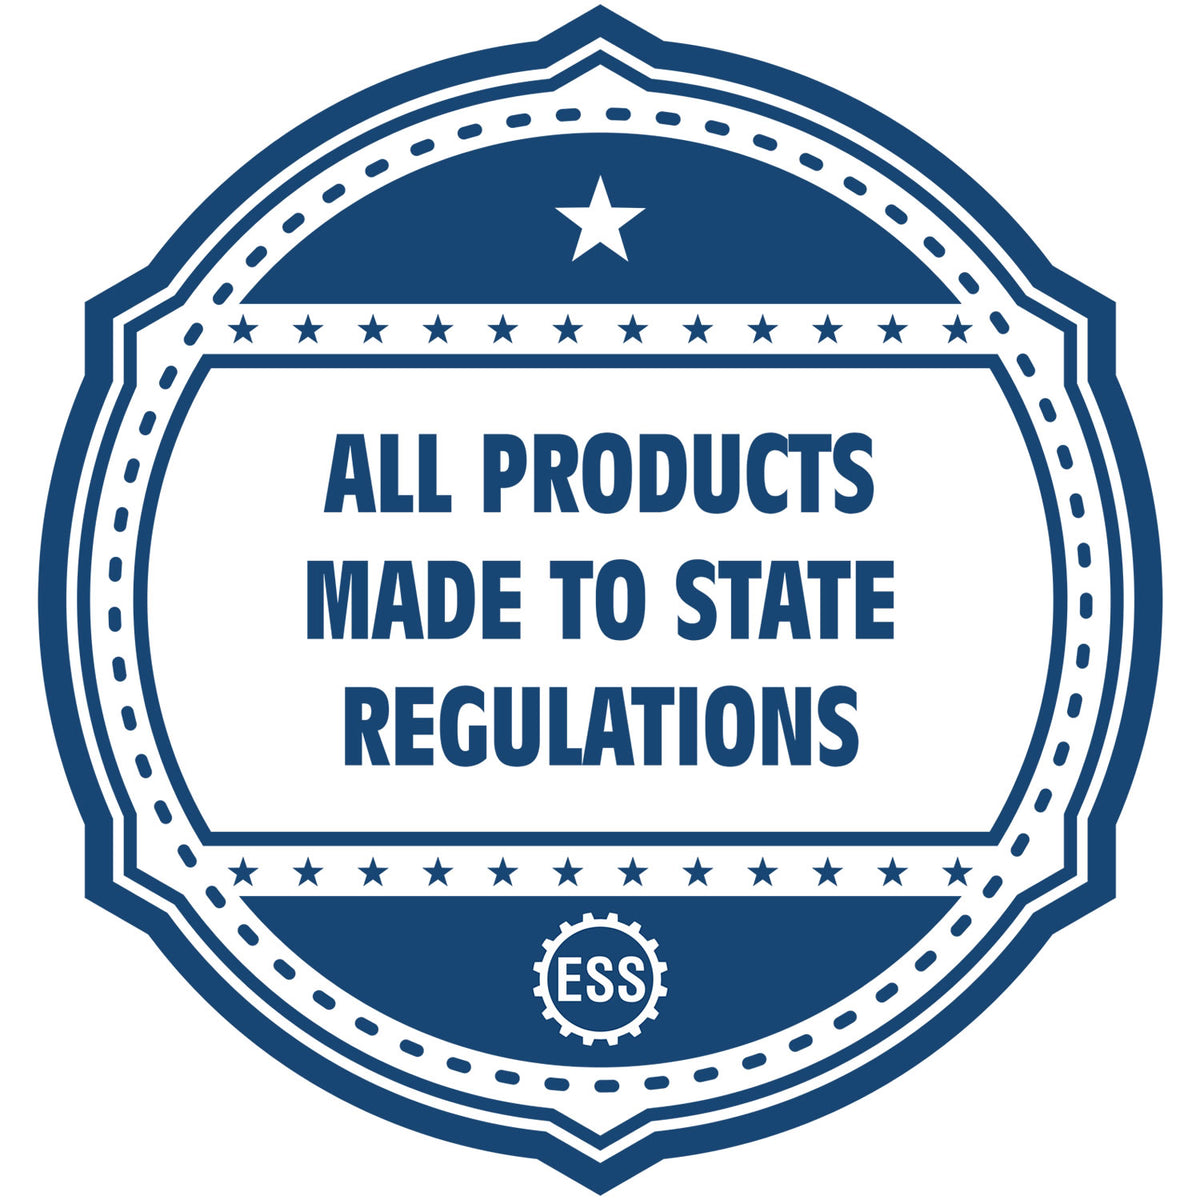 An icon or badge element for the State of Arkansas Extended Long Reach Engineer Seal showing that this product is made in compliance with state regulations.